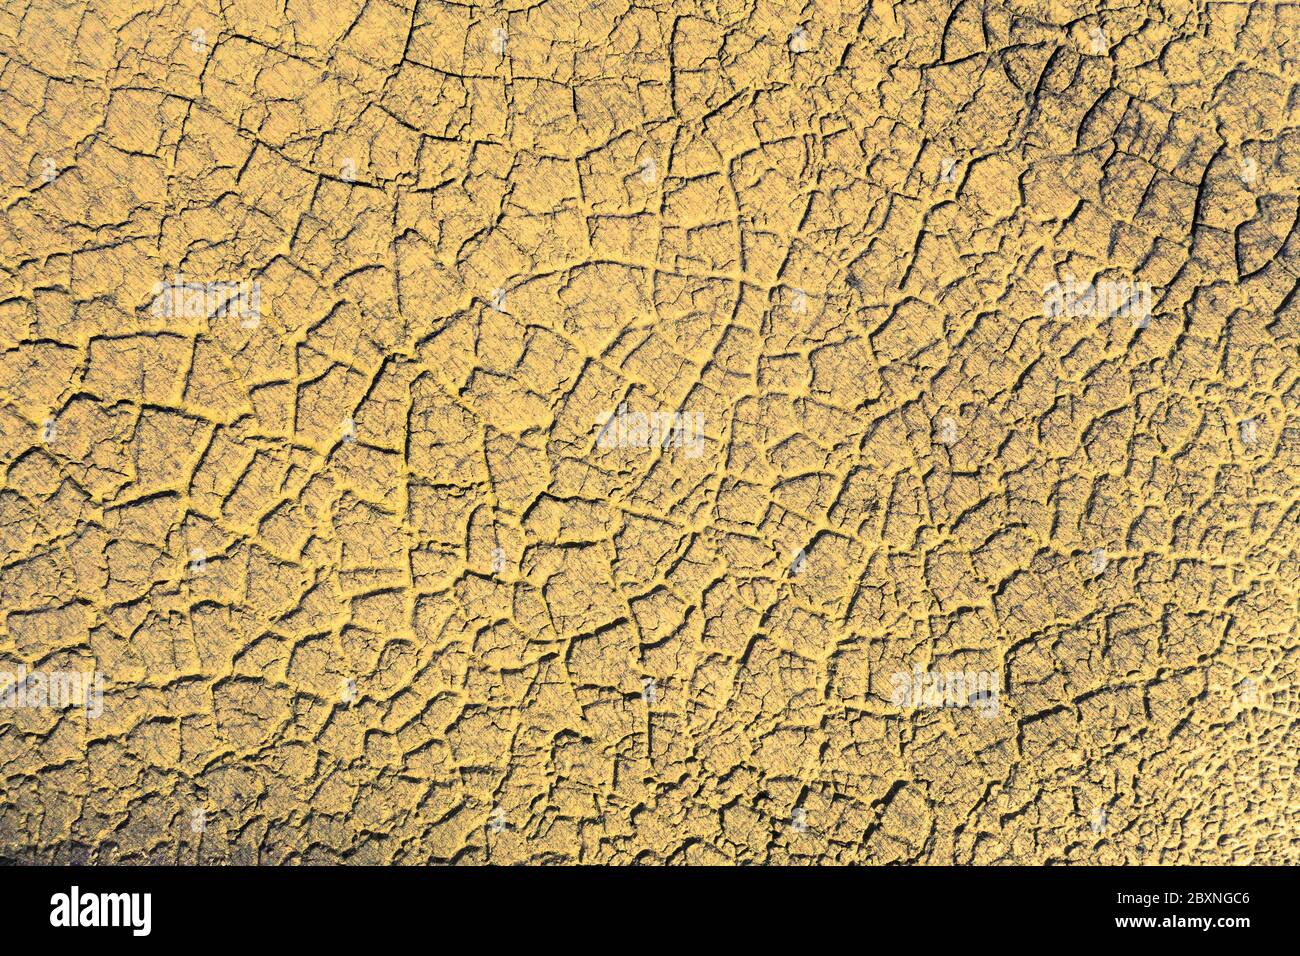 Land cracked by drought. Stock Photo